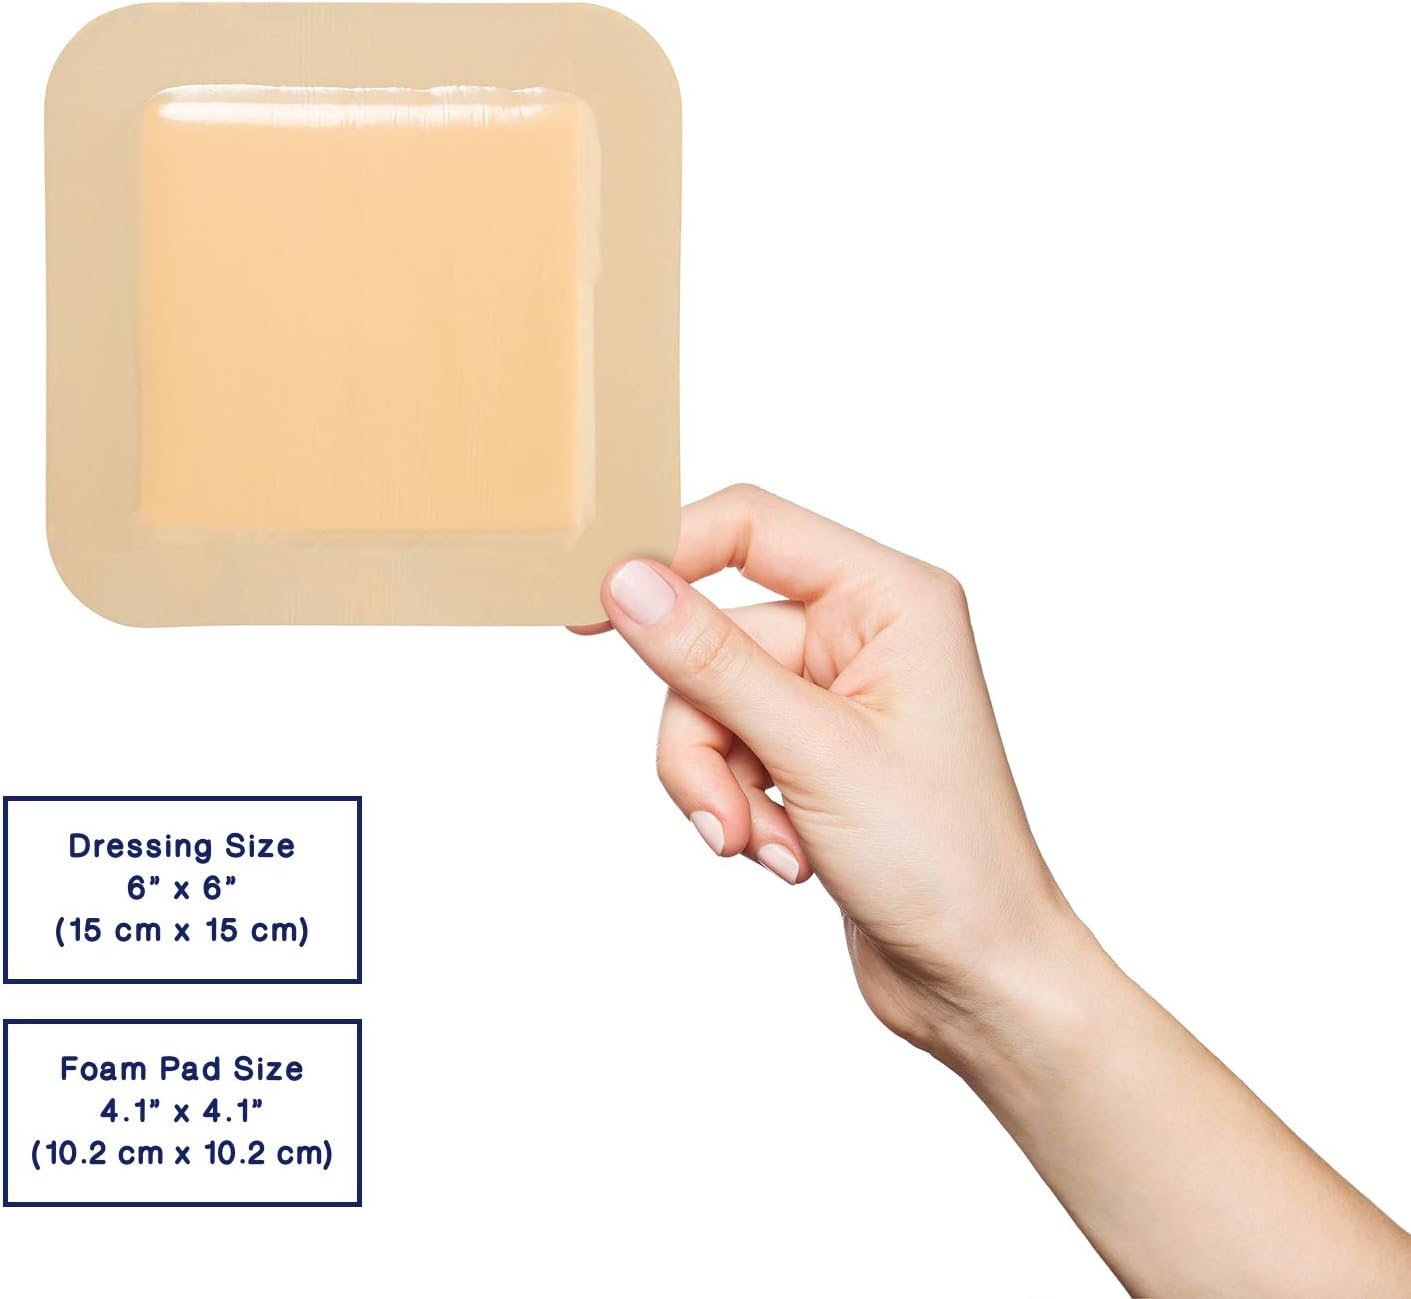 MedVance Foam Bordered Adhesive Wound Dressing, 6"x6"